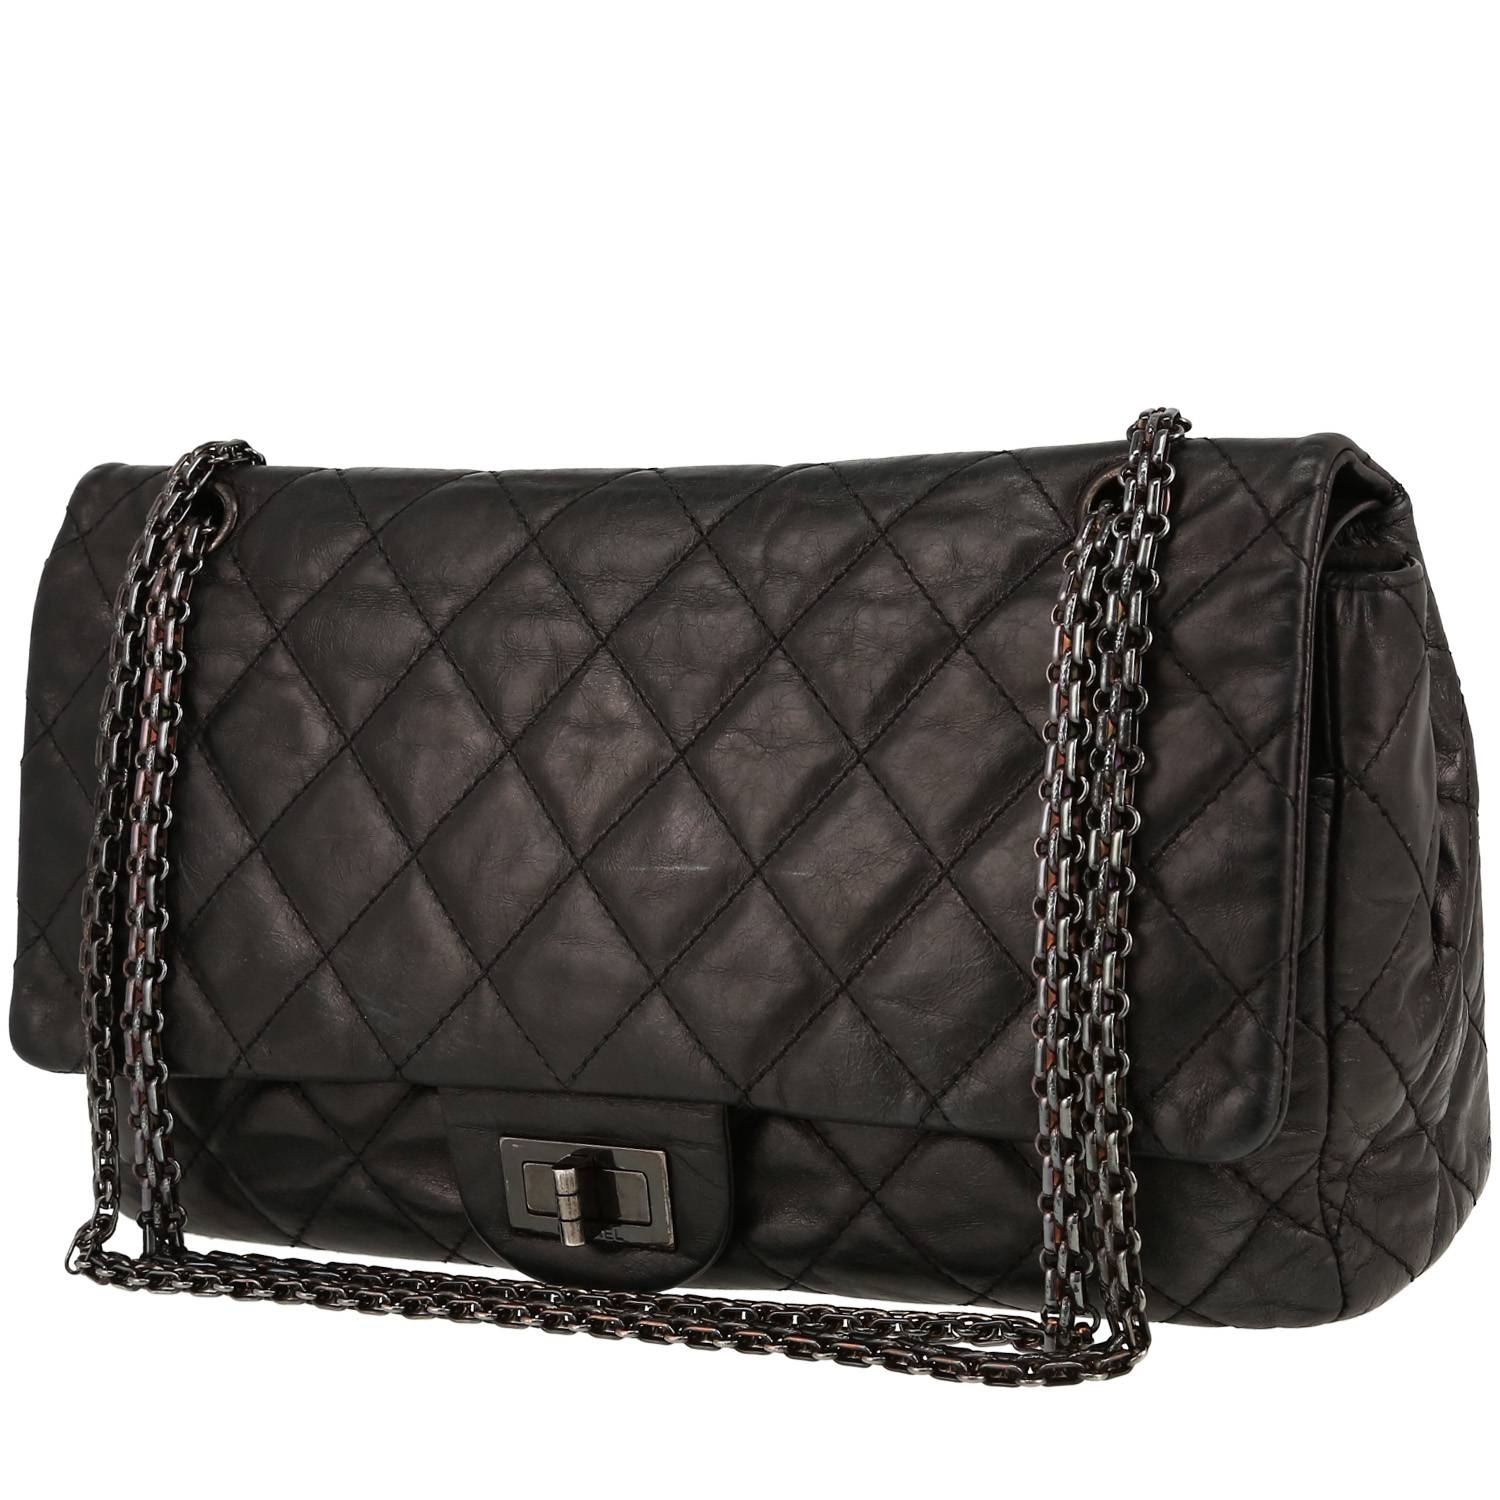 2.55 Handbag In Black Quilted Leather